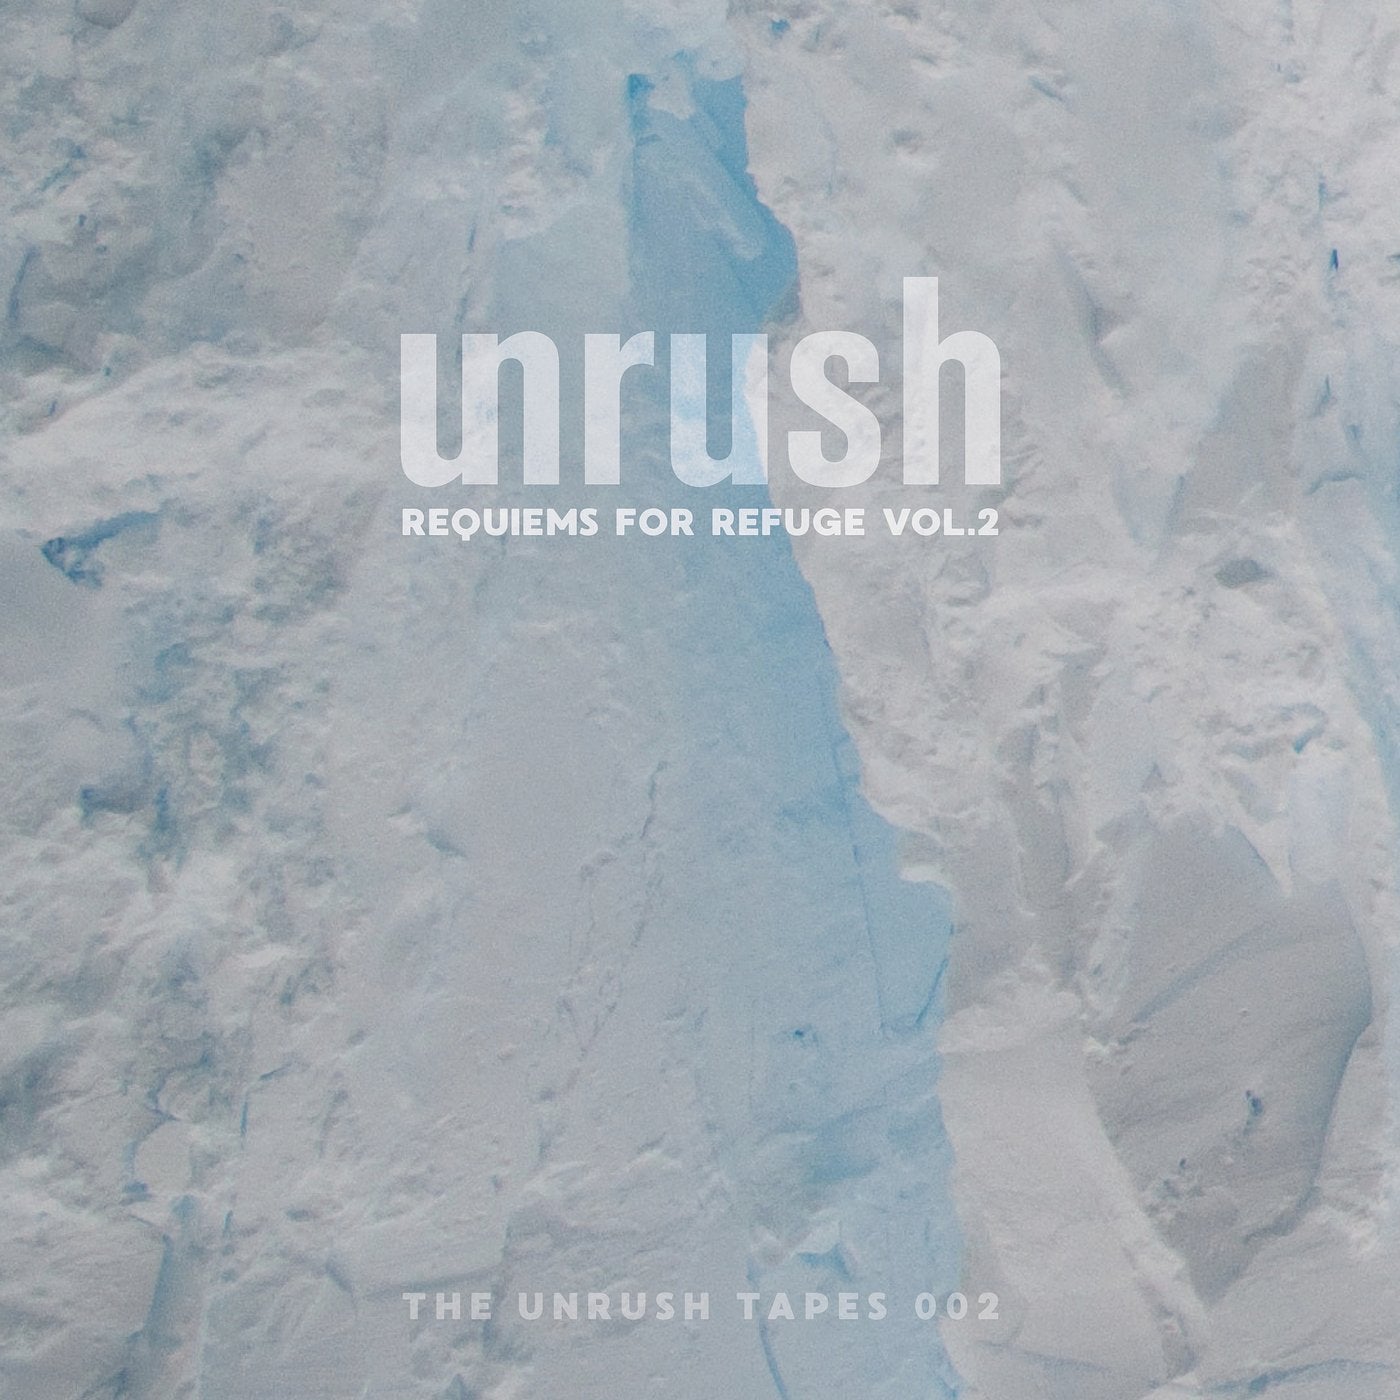 The Unrush Tapes 02 - Requiems For Refuge Vol. 2